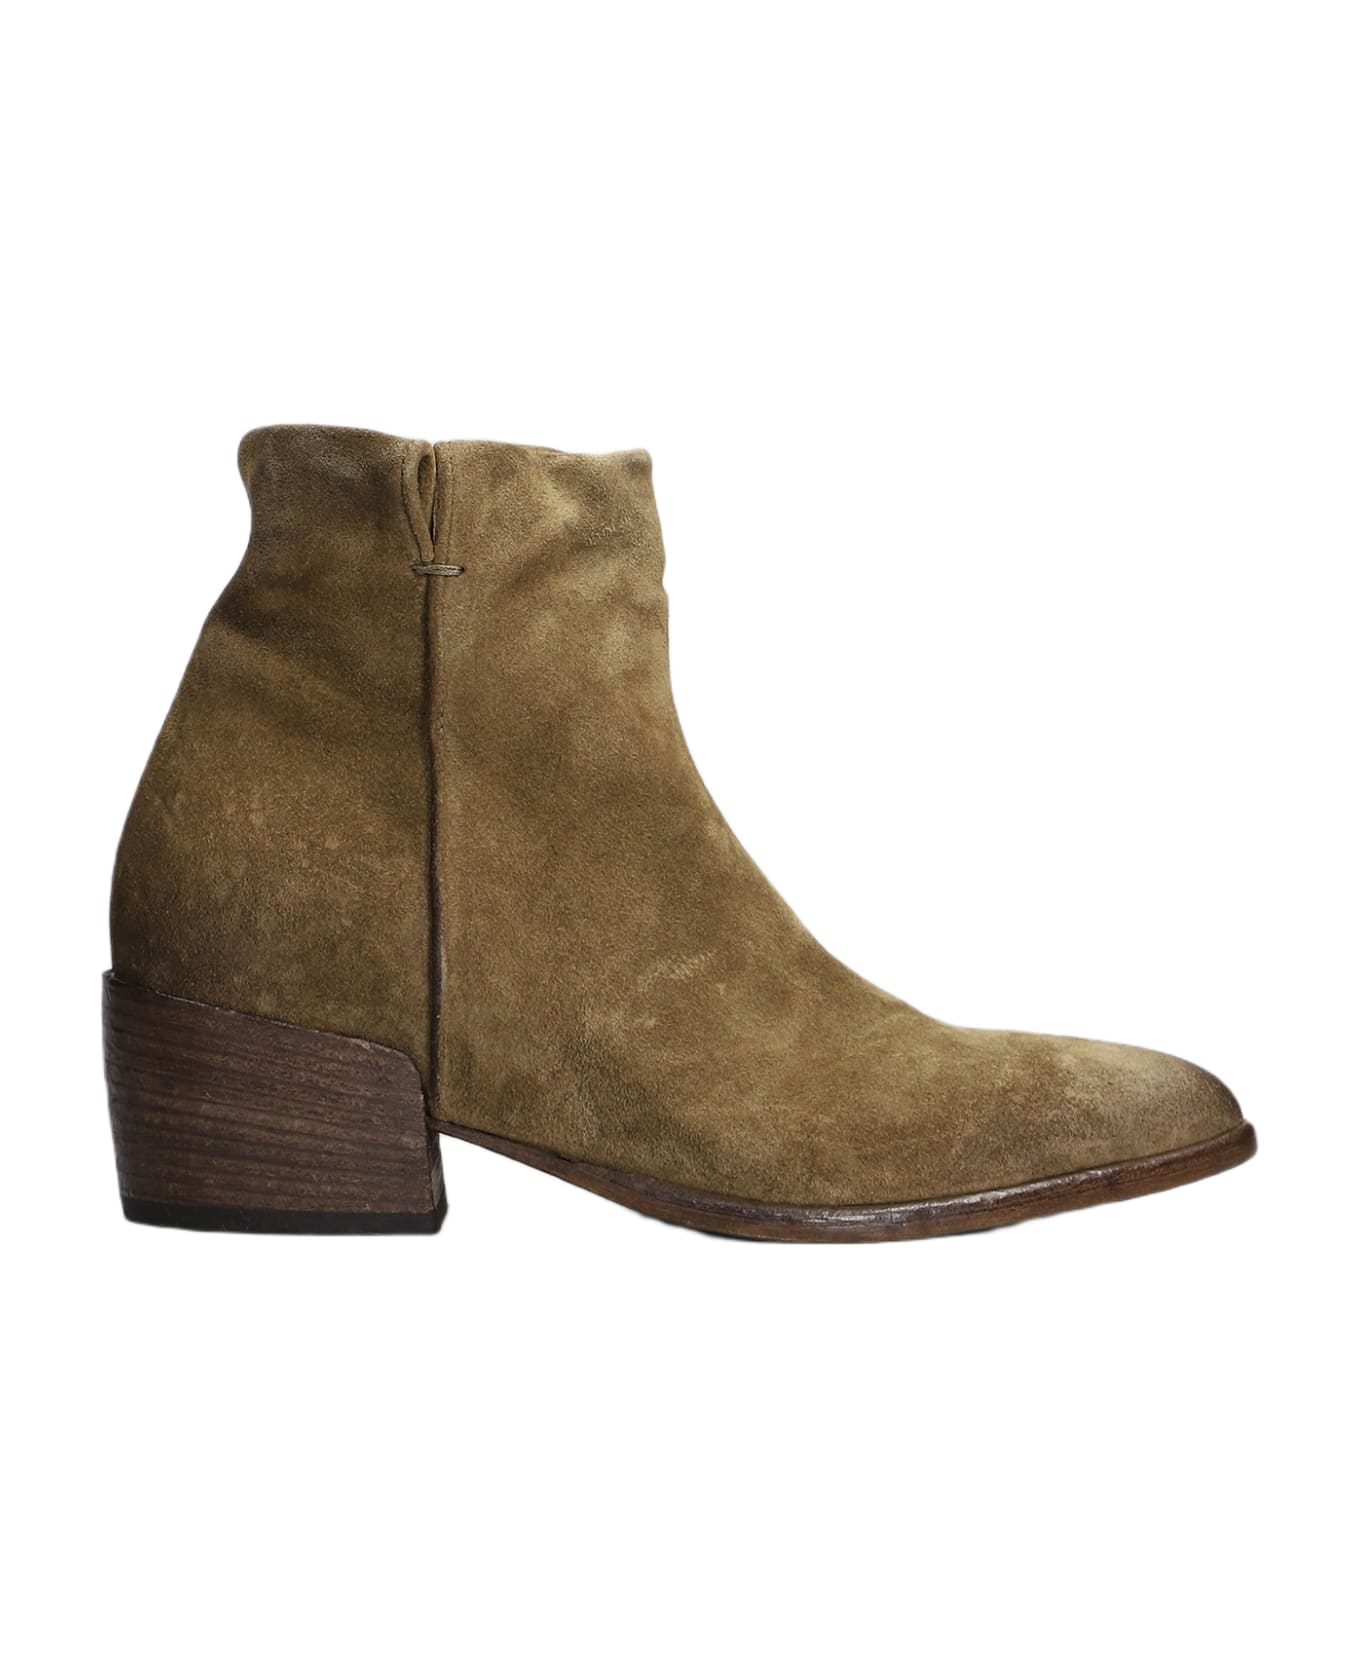 Elena Iachi Texan Ankle Boots In Taupe Suede - taupe